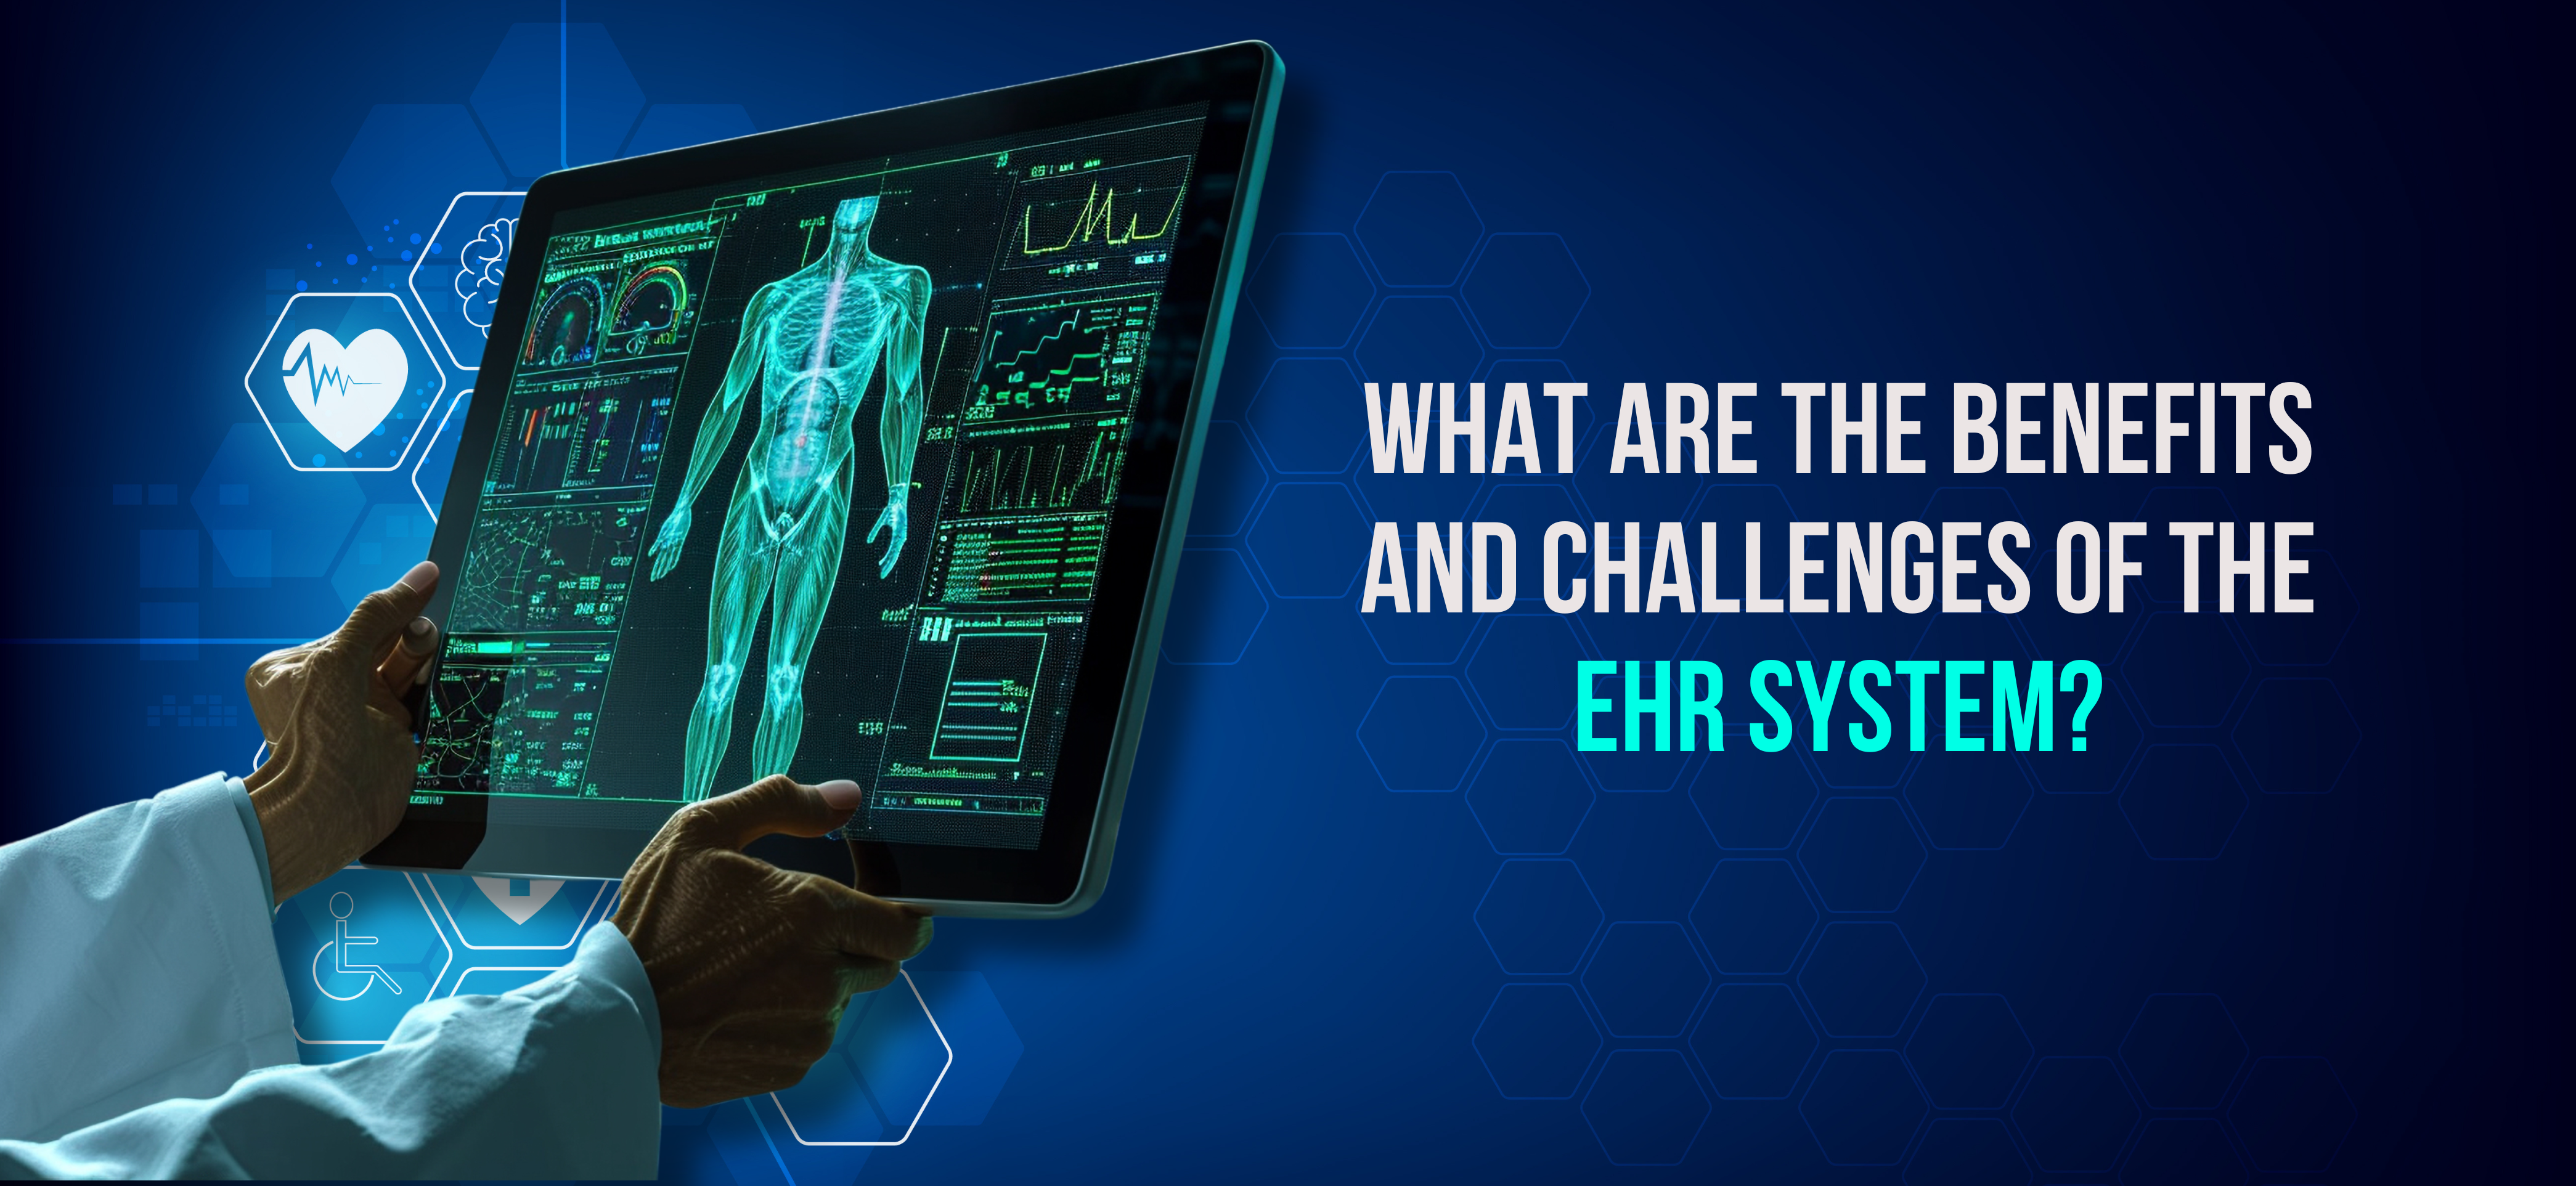 What Are the Benefits and Challenges in The EHR System? - Internet Soft